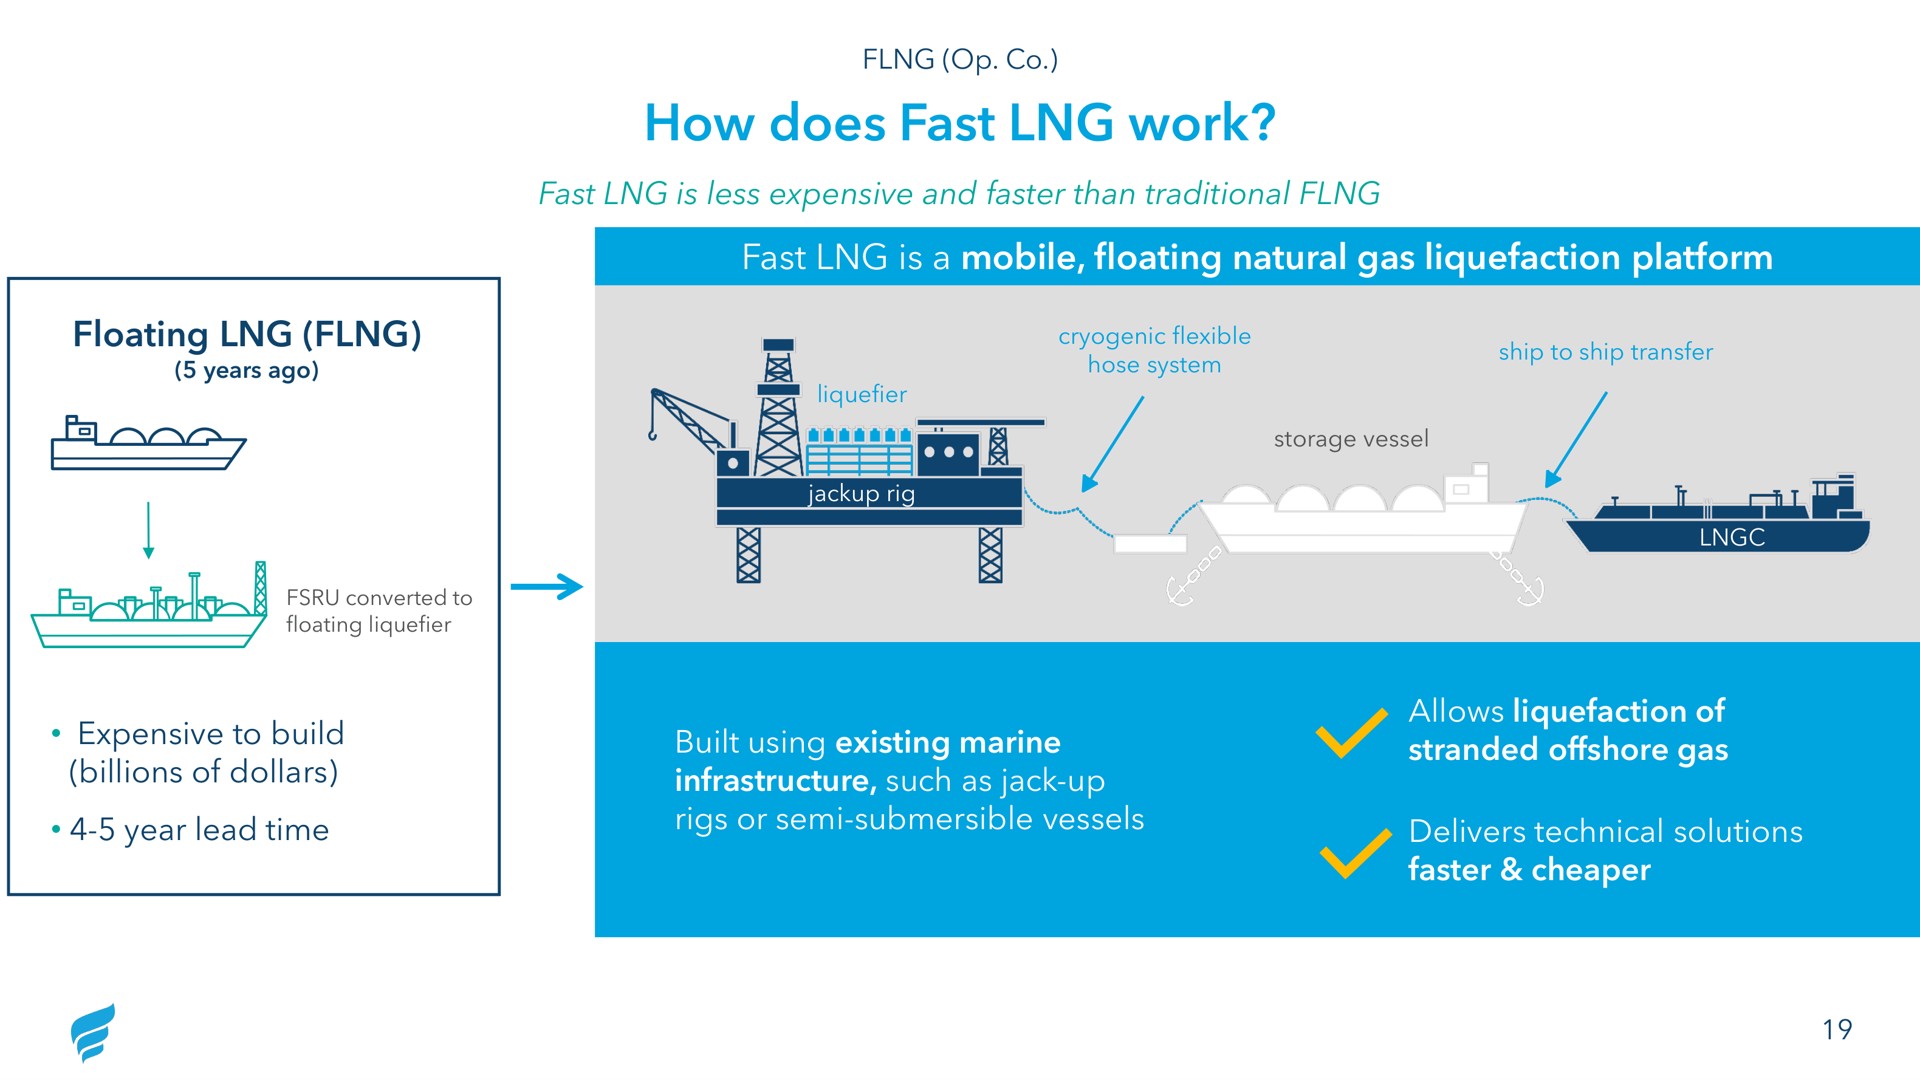 how does fast work is a mobile floating natural gas liquefaction platform | NewFortress Energy